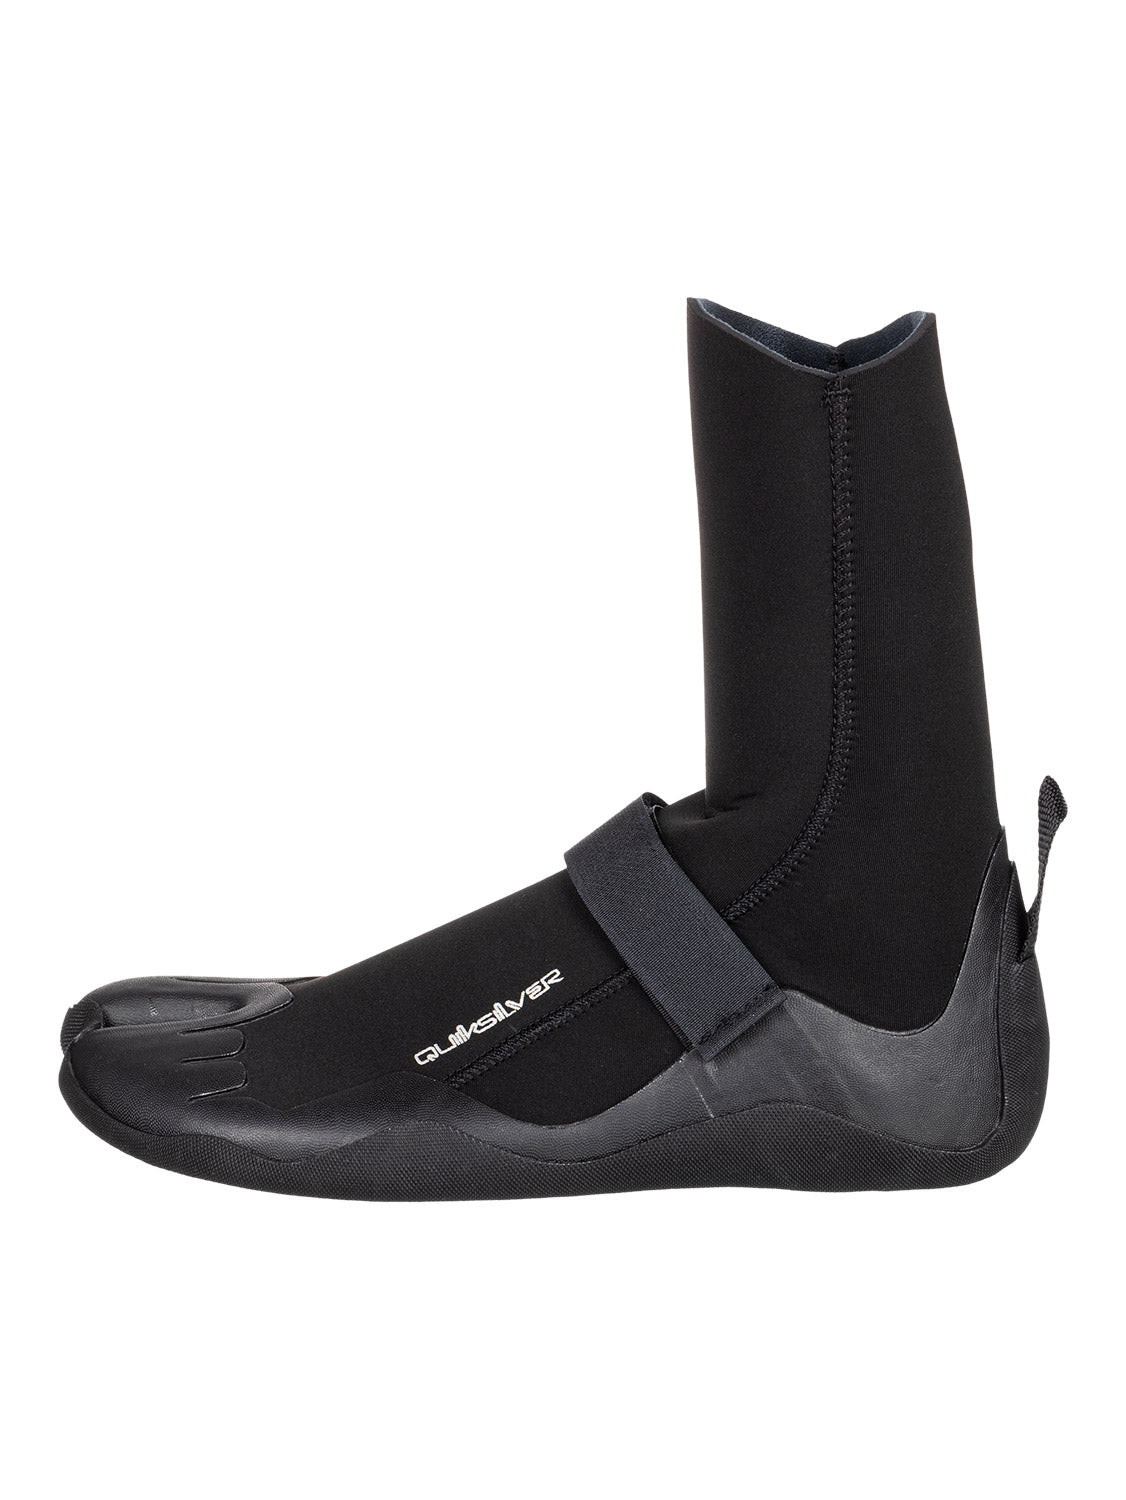 Quiksilver Men's 3mm Everyday Sessions Wetsuit Boots